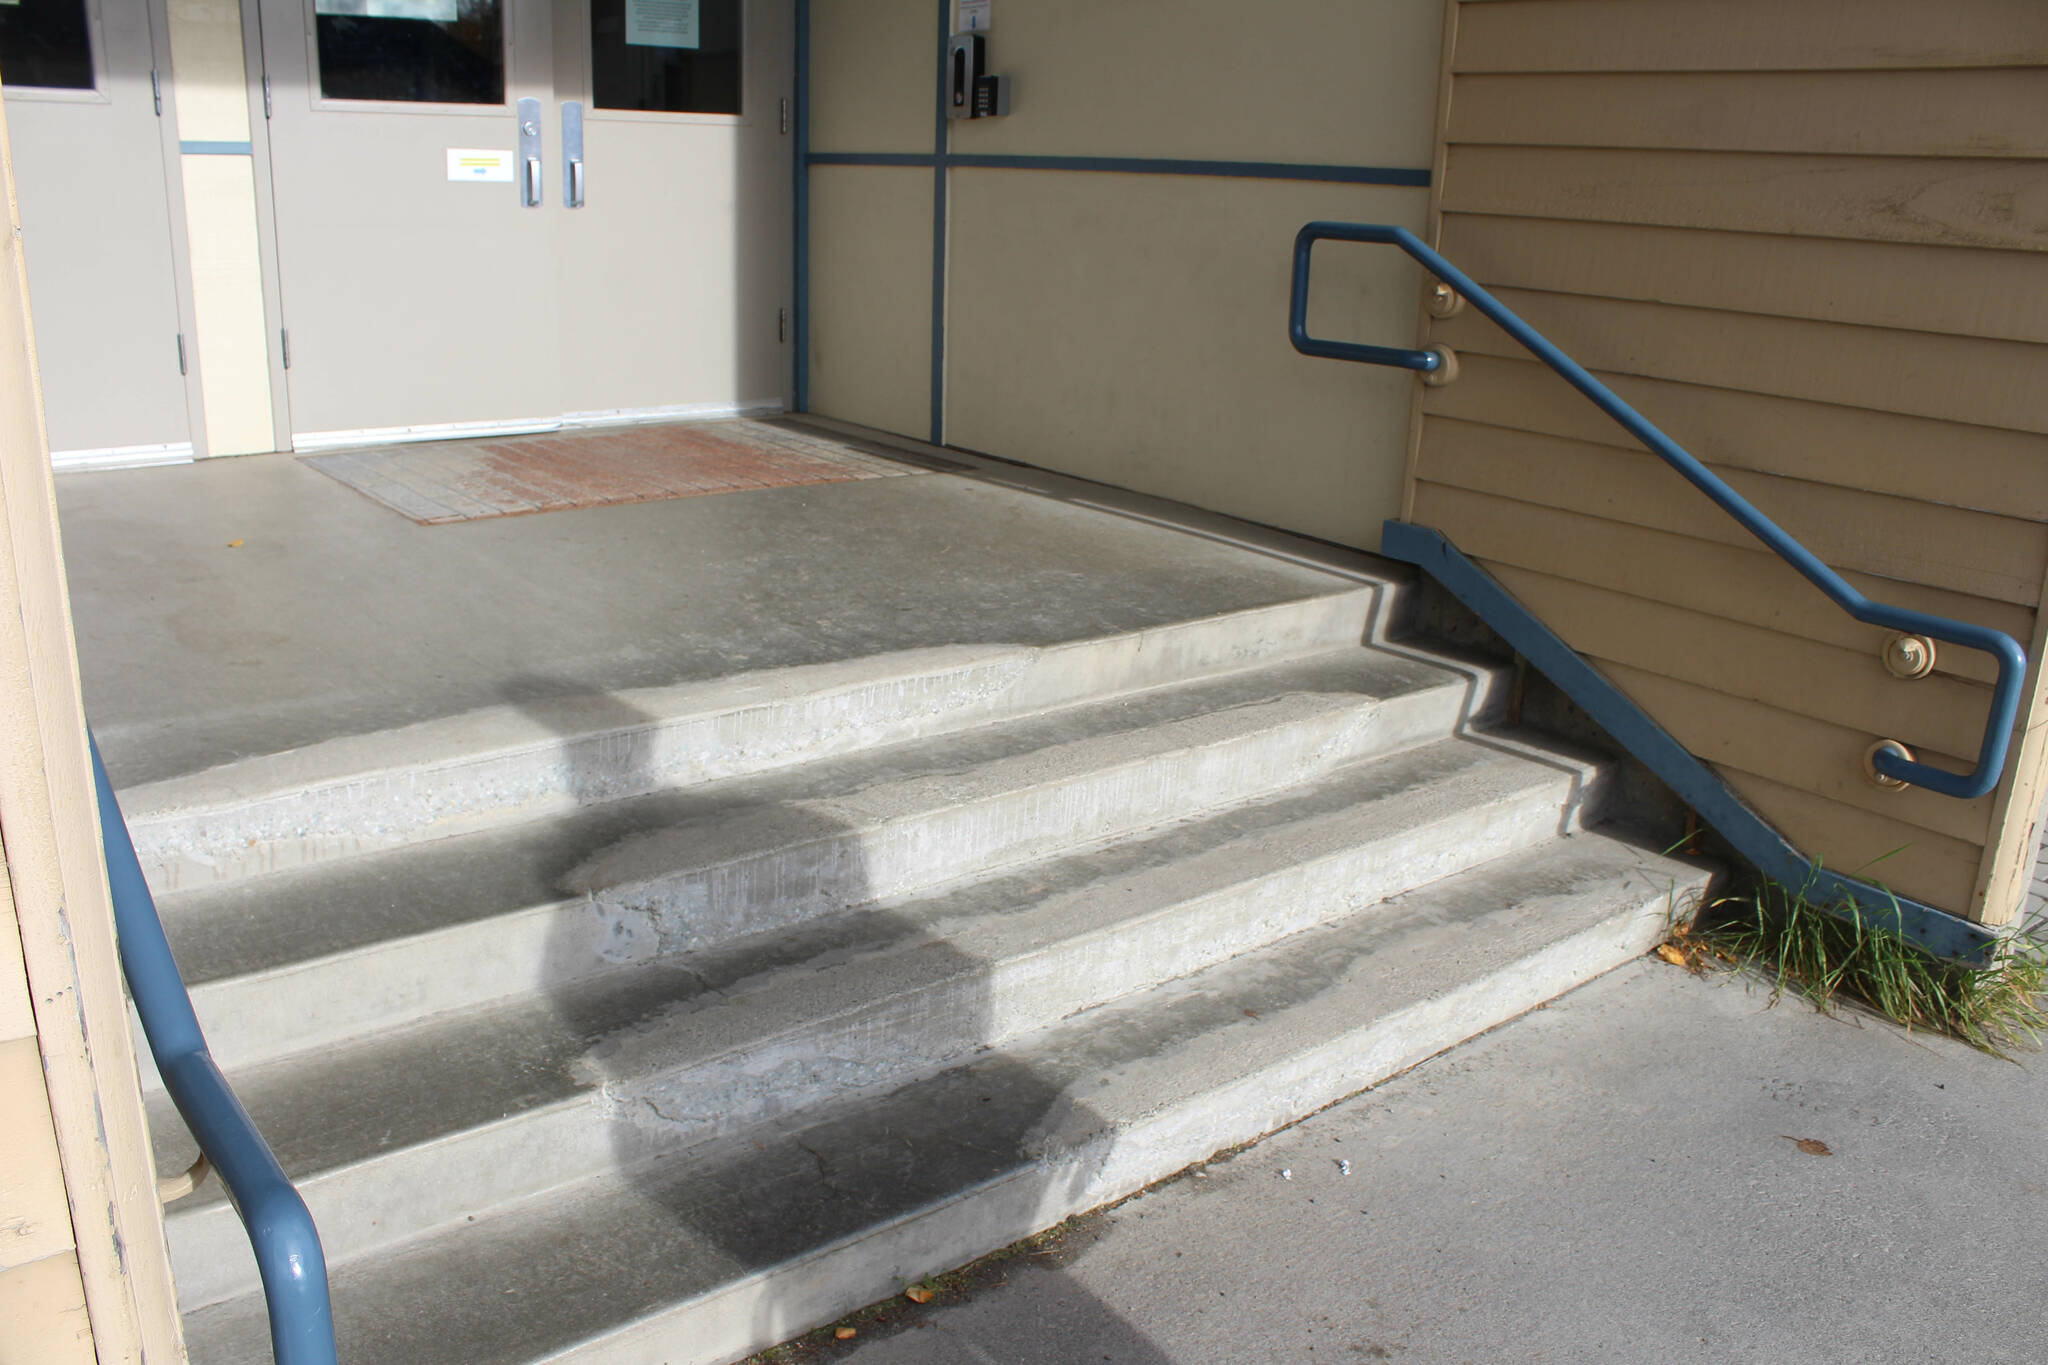 Concrete steps effected by spalling lead to the front entrance of Soldotna Elementary School on Friday, Sept. 30, 2022. (Ashlyn O’Hara/Peninsula Clarion)